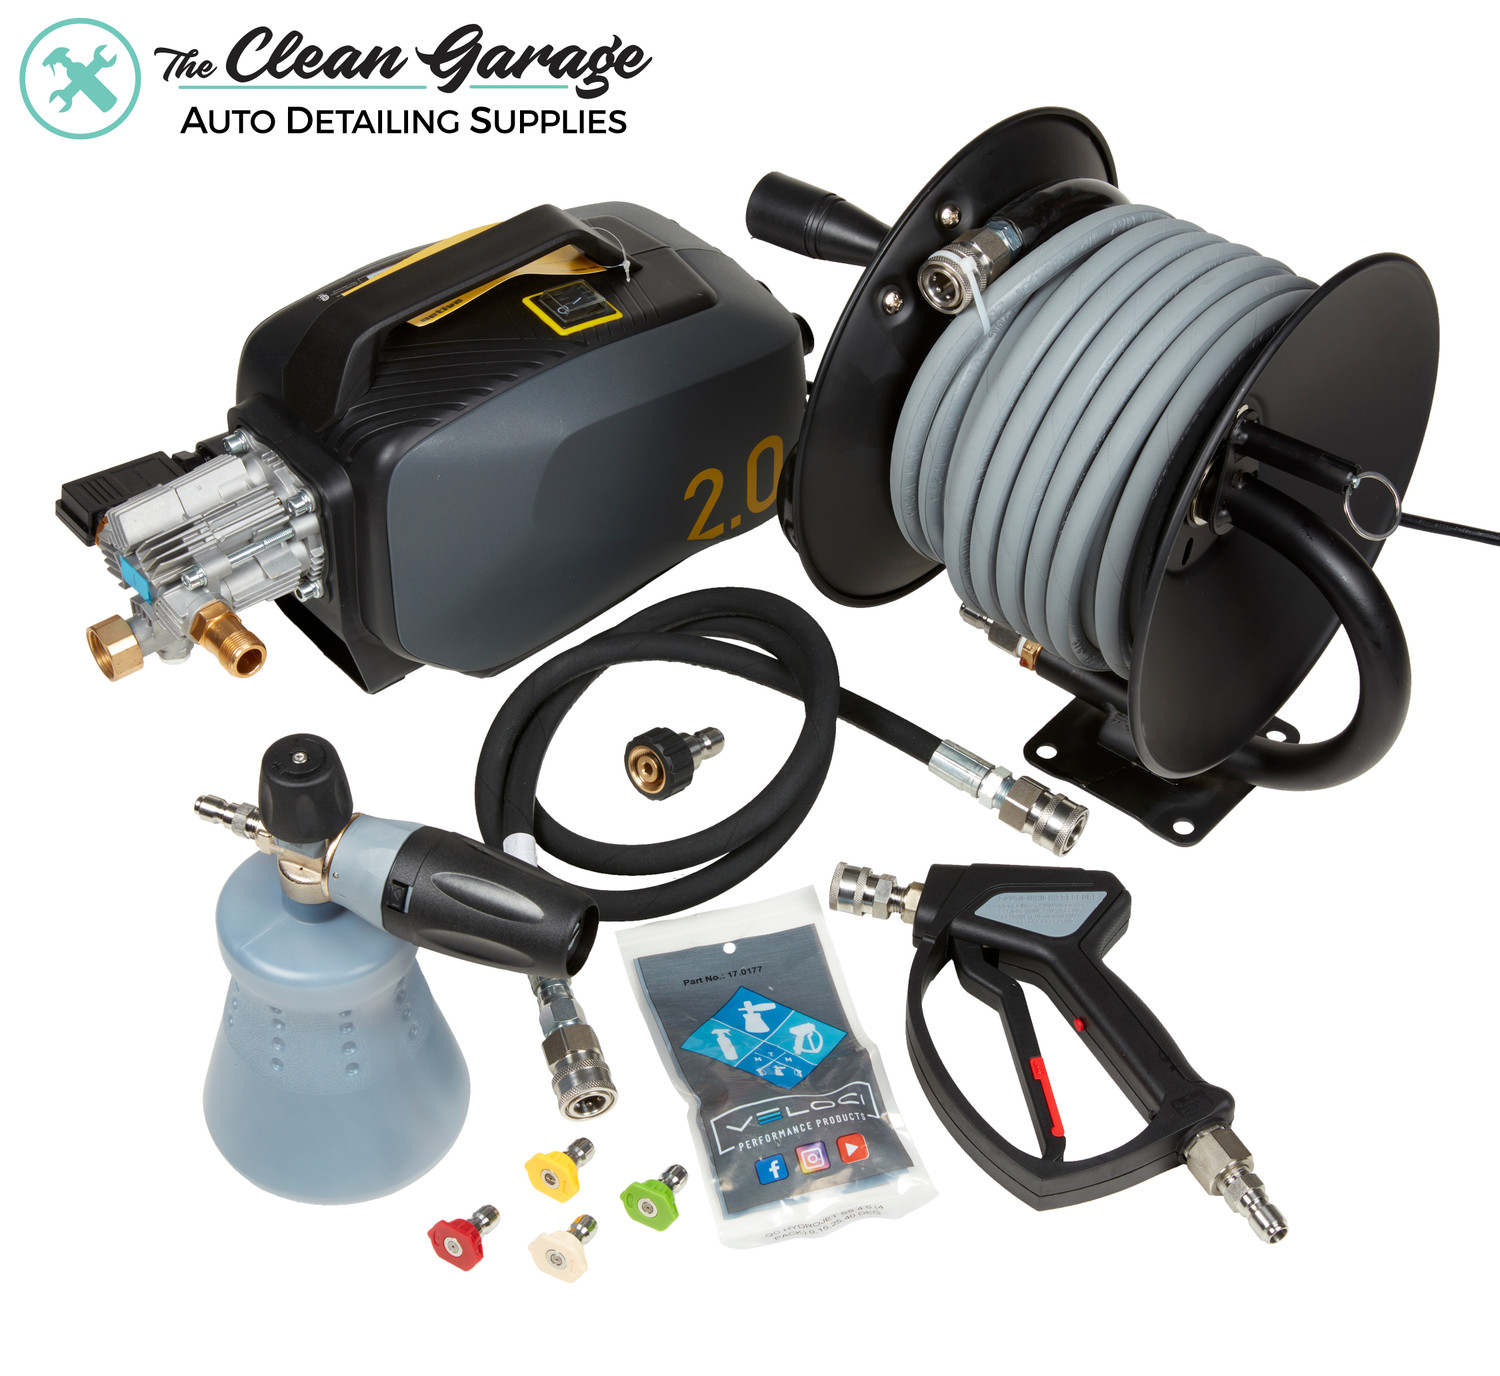 Active 2.0 Pressure Washer | Complete Wall Mount Package | Level 5